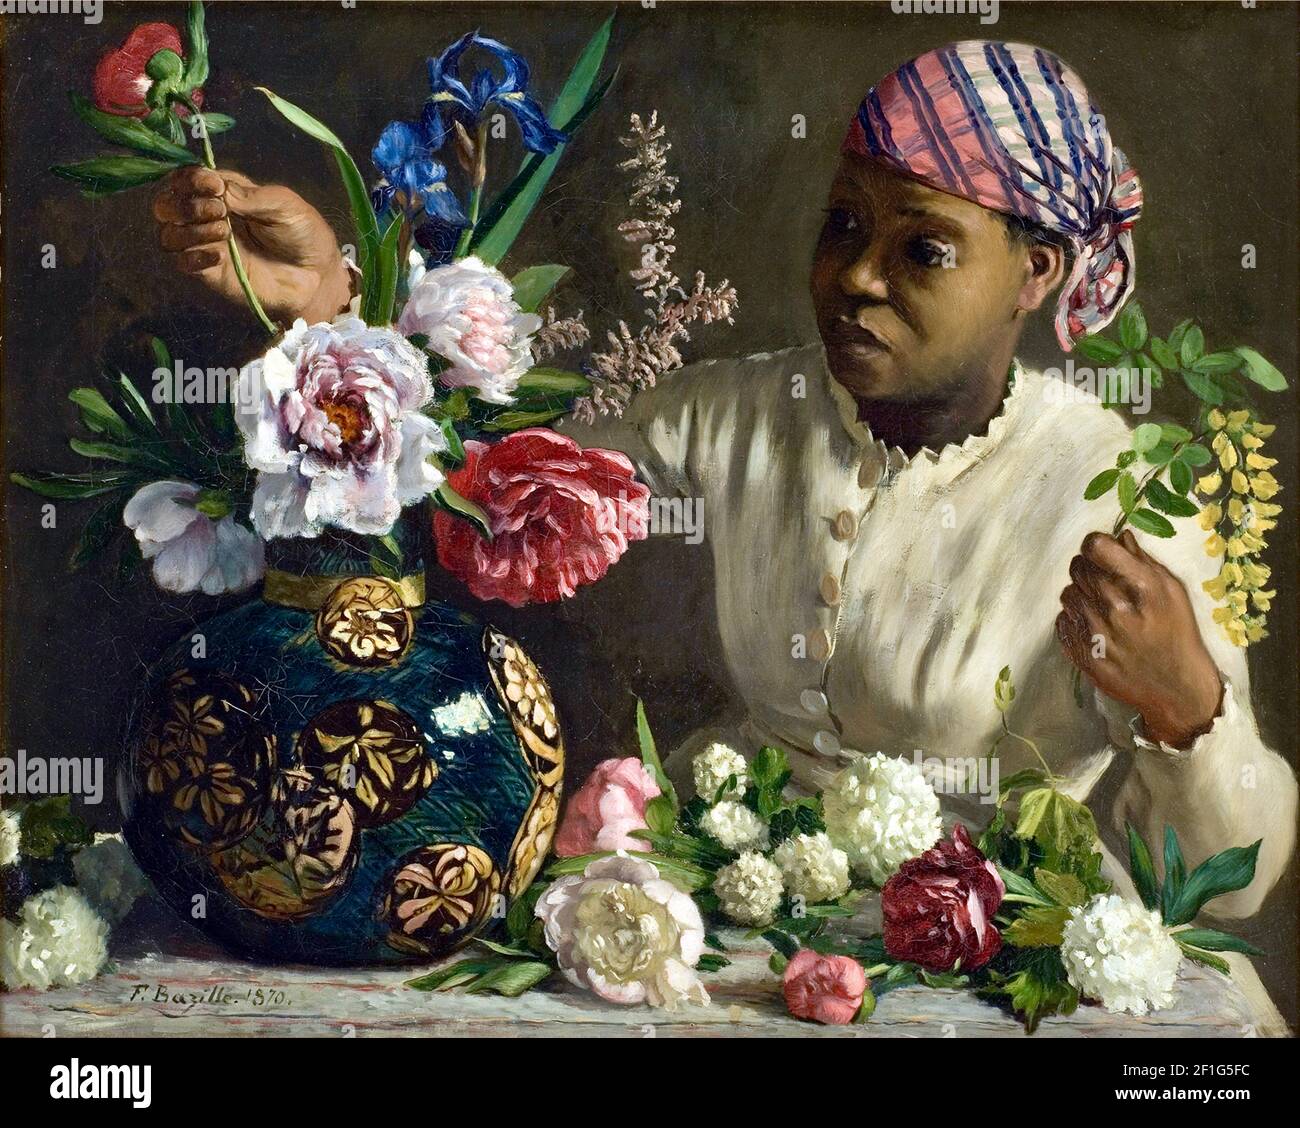 Frederick Bazille artwork entitled Woman with Peonies. Woman of Colour arranging beautiful floral display. Stock Photo